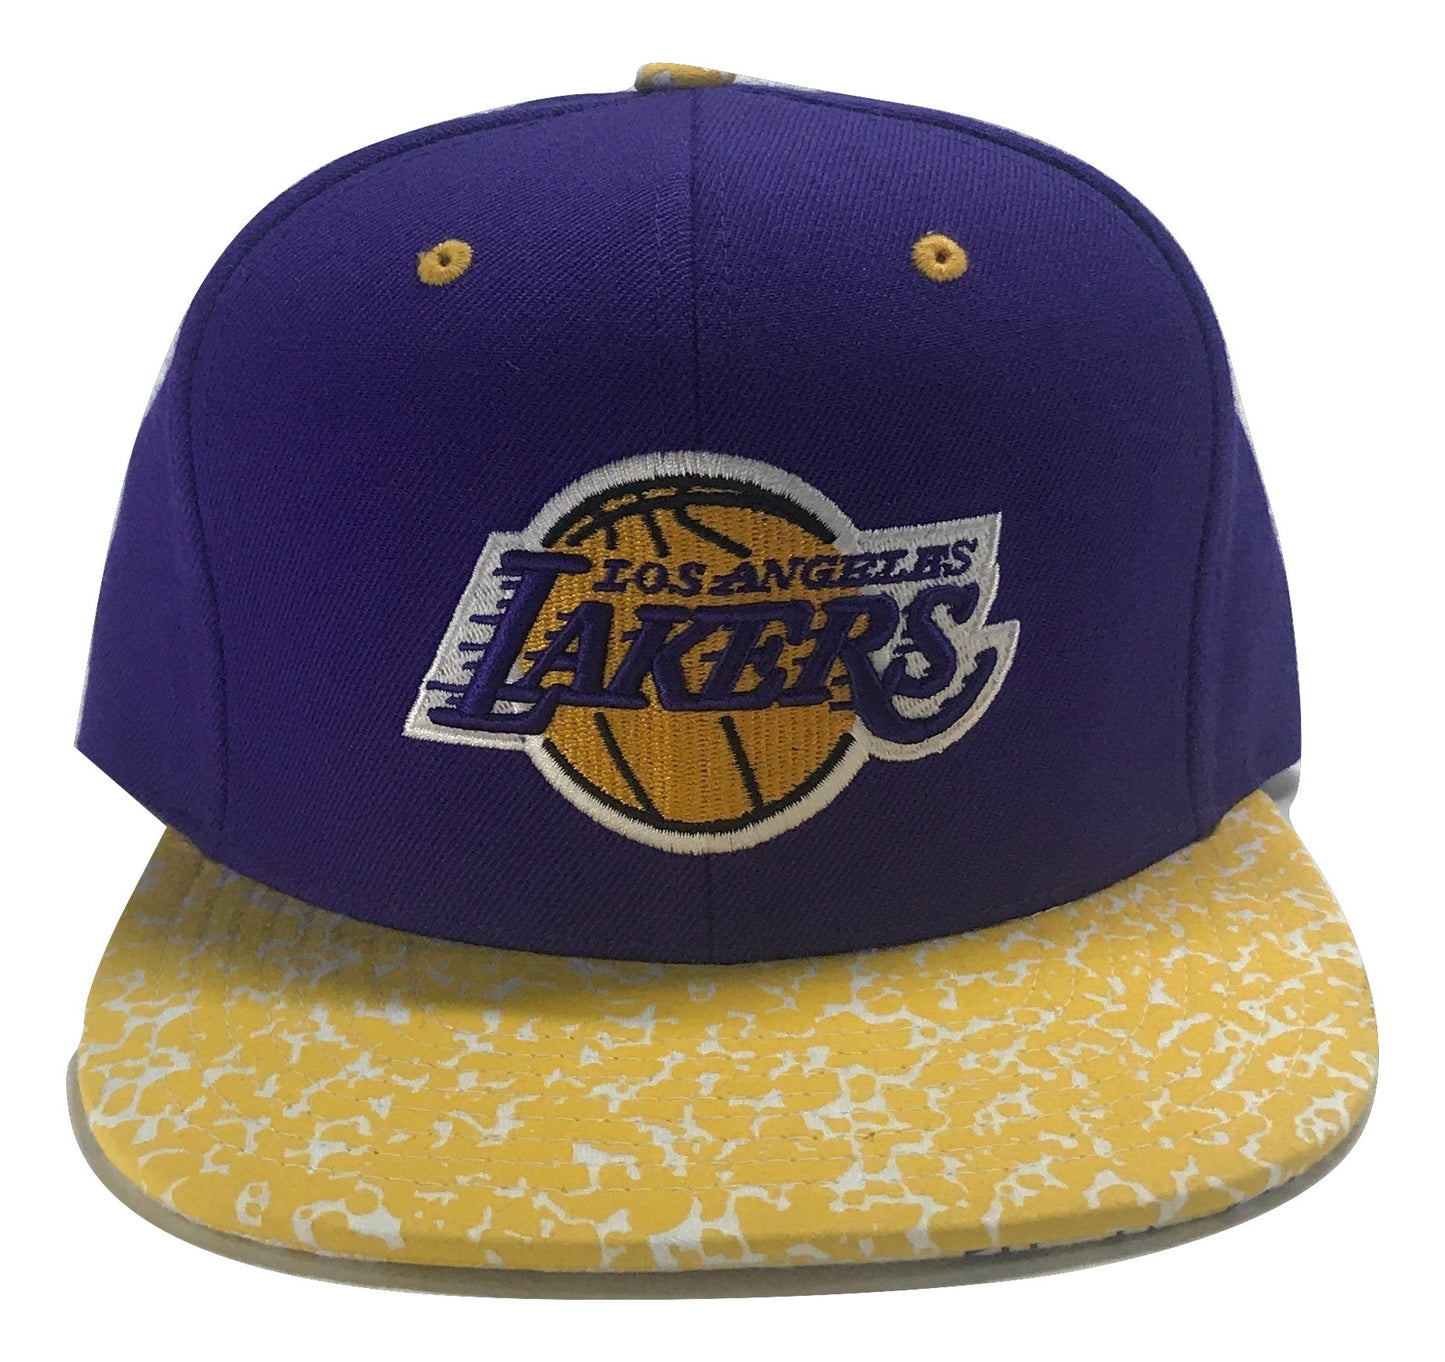 Los Angeles Lakers Pin (Grey/Purple) Snapback – Cap World: Embroidery